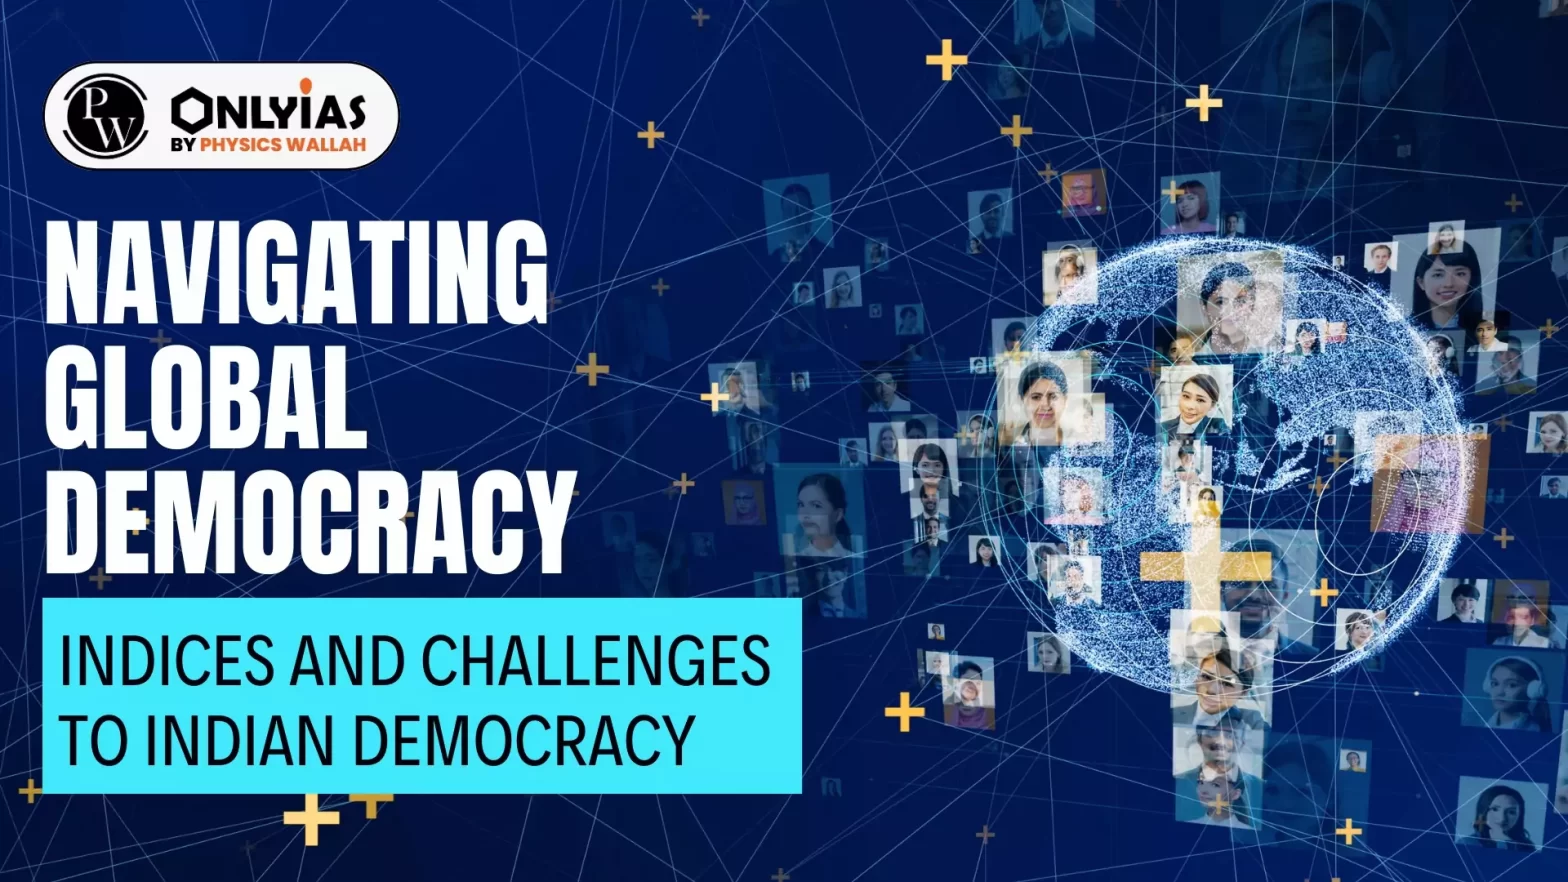 Navigating Global Democracy Indices and Challenges to Indian Democracy